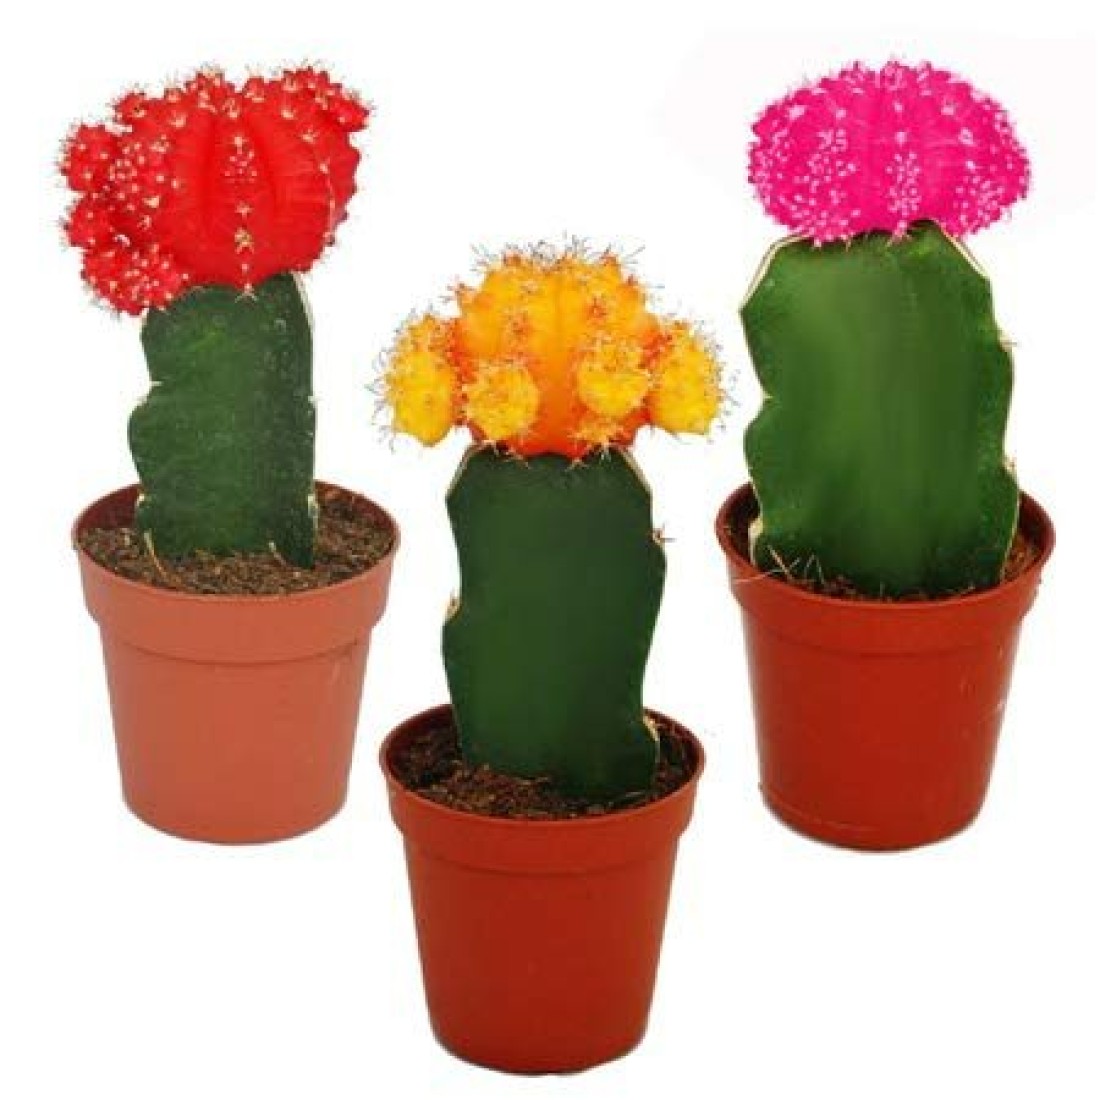 Moon Cactus Pack of 3 Plants (Red,Yellow,Pink)|Live Cactus Plant 1